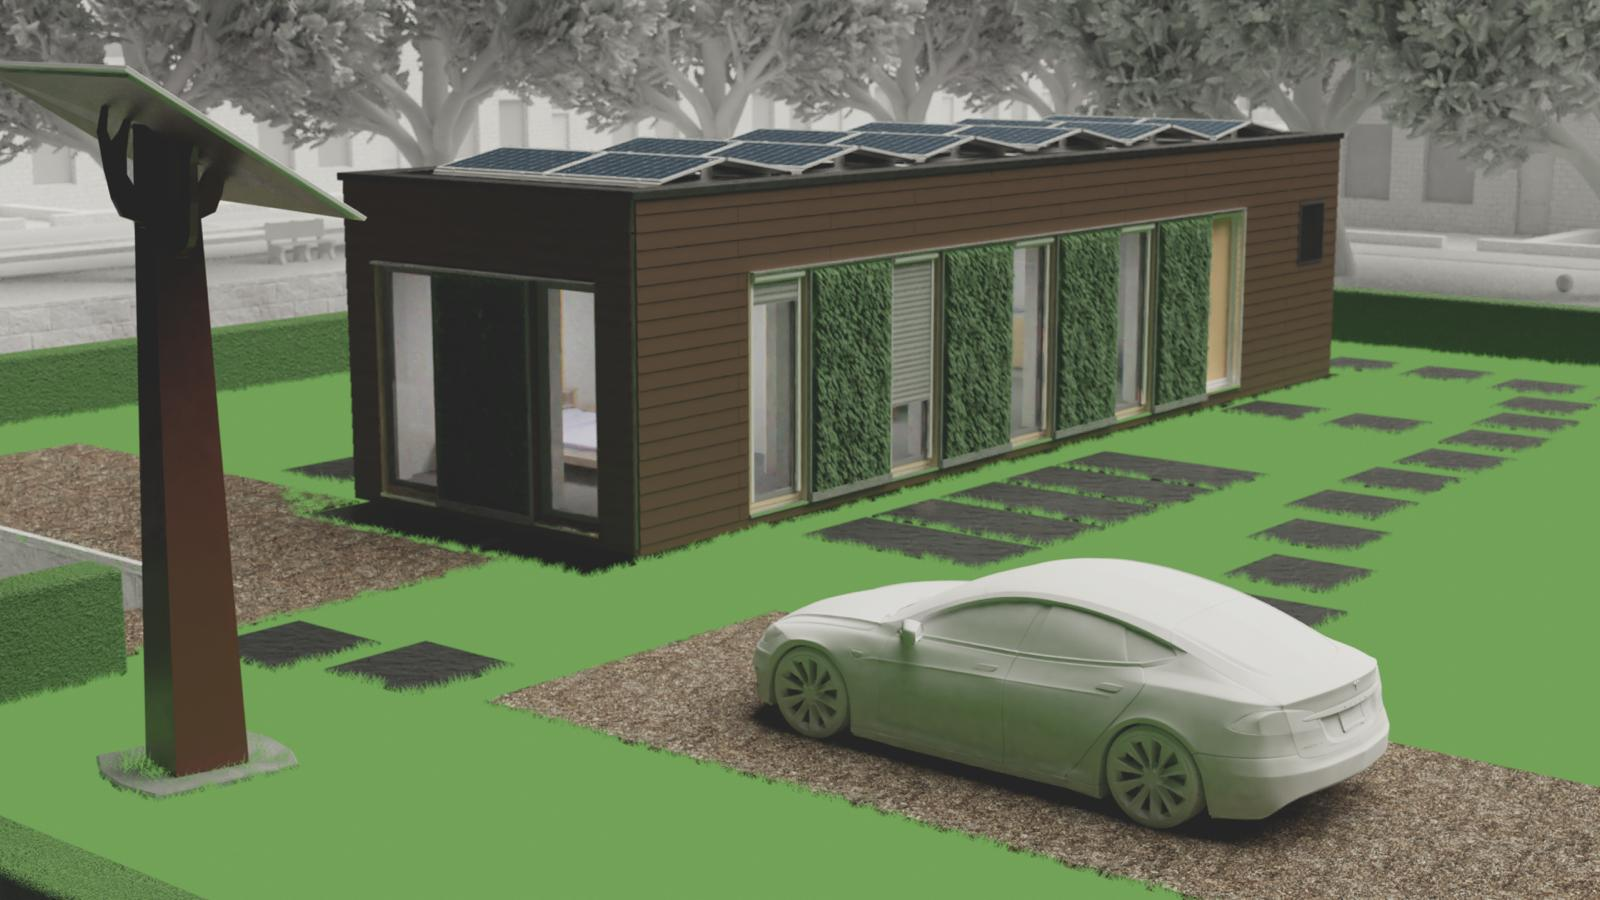 Computer image of a rectangular home that has solar panels on the roof, brown wooden exterior paneling, and floor-to-ceiling windows interspersed with exterior living walls.